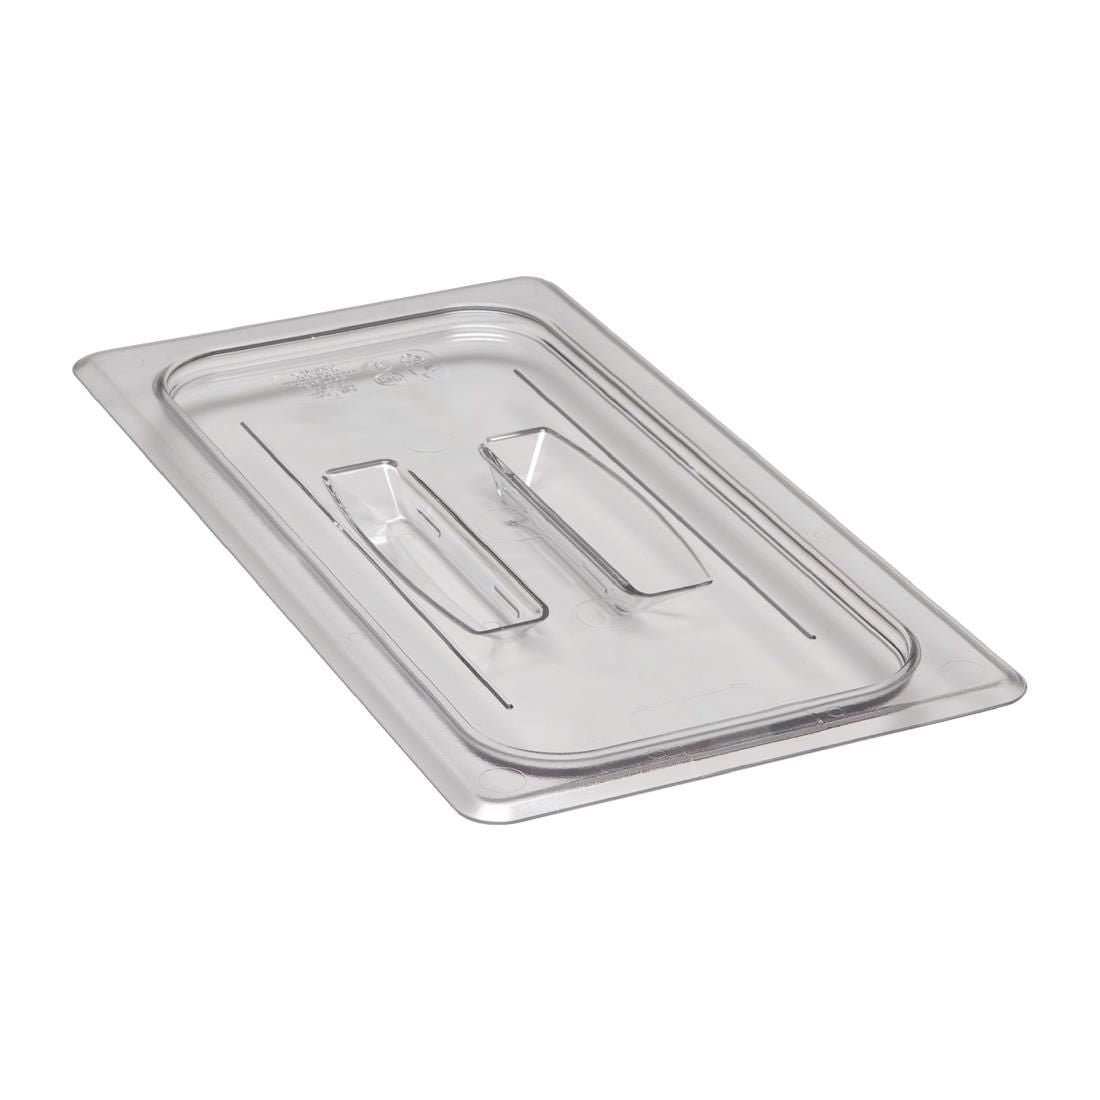 DM713 Cambro Polycarbonate 1/3 Gastronorm Pan Lid JD Catering Equipment Solutions Ltd